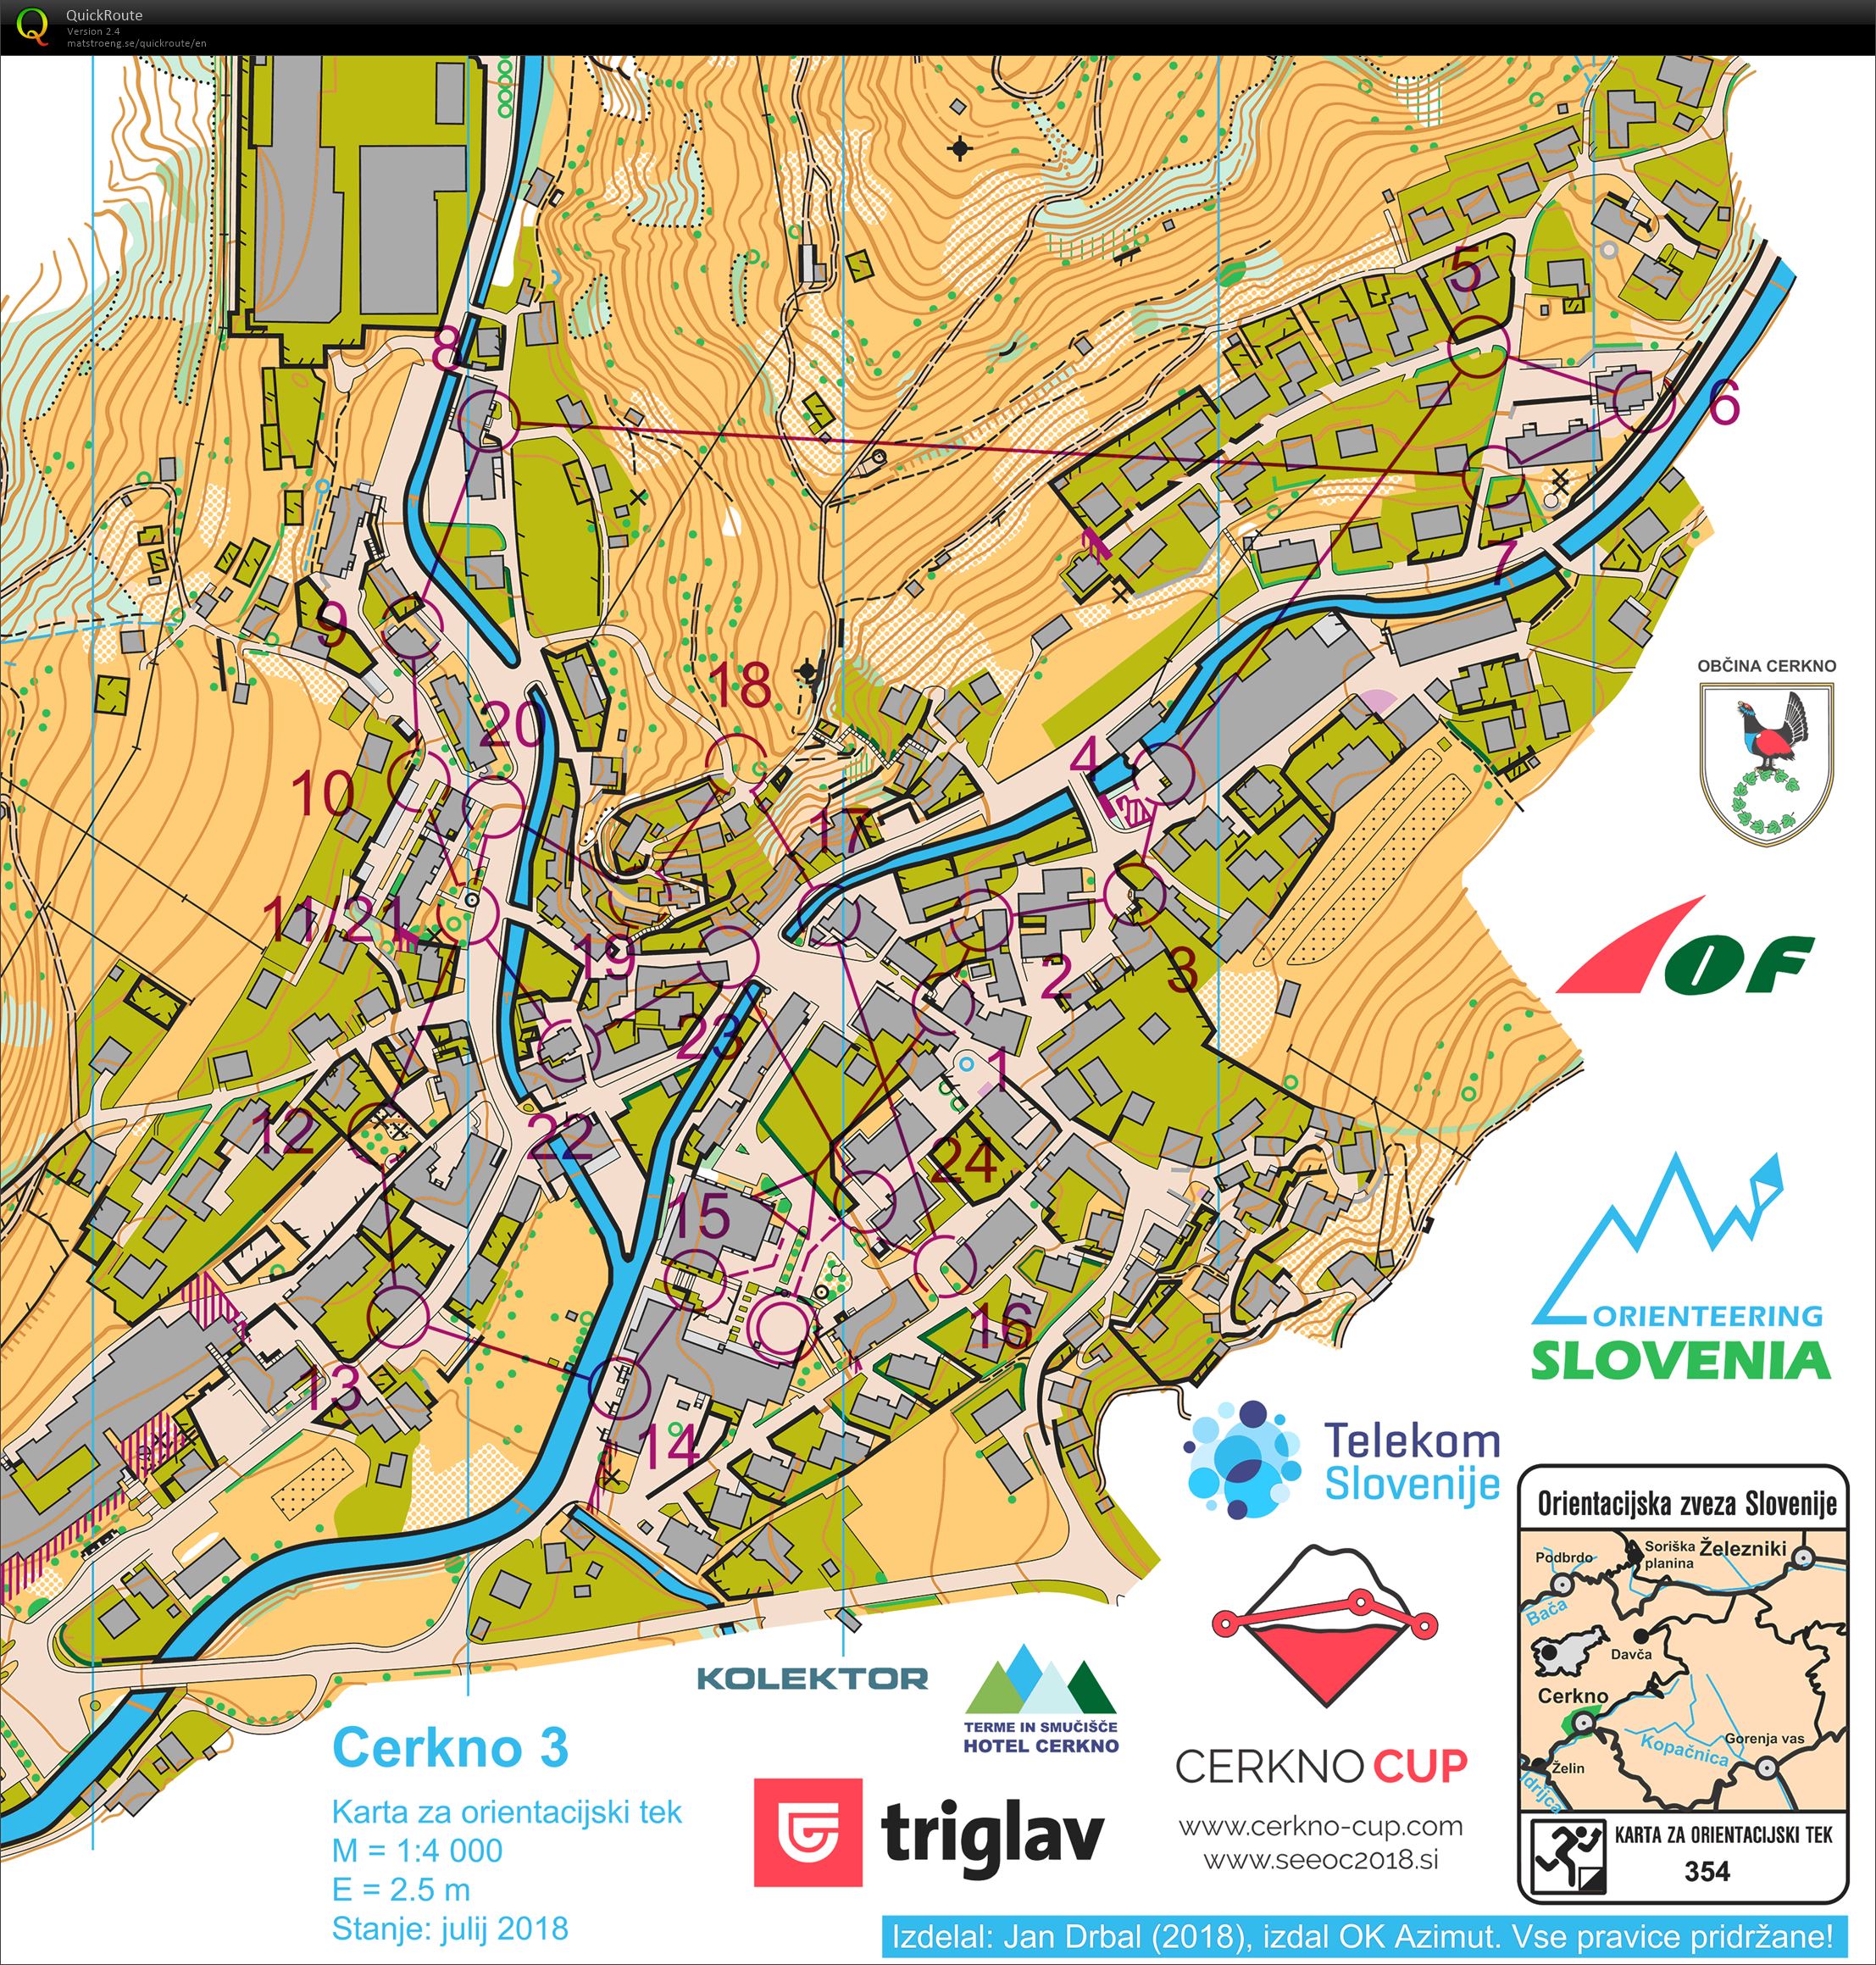 Cerkno Cup Stage 4 (25-08-2018)